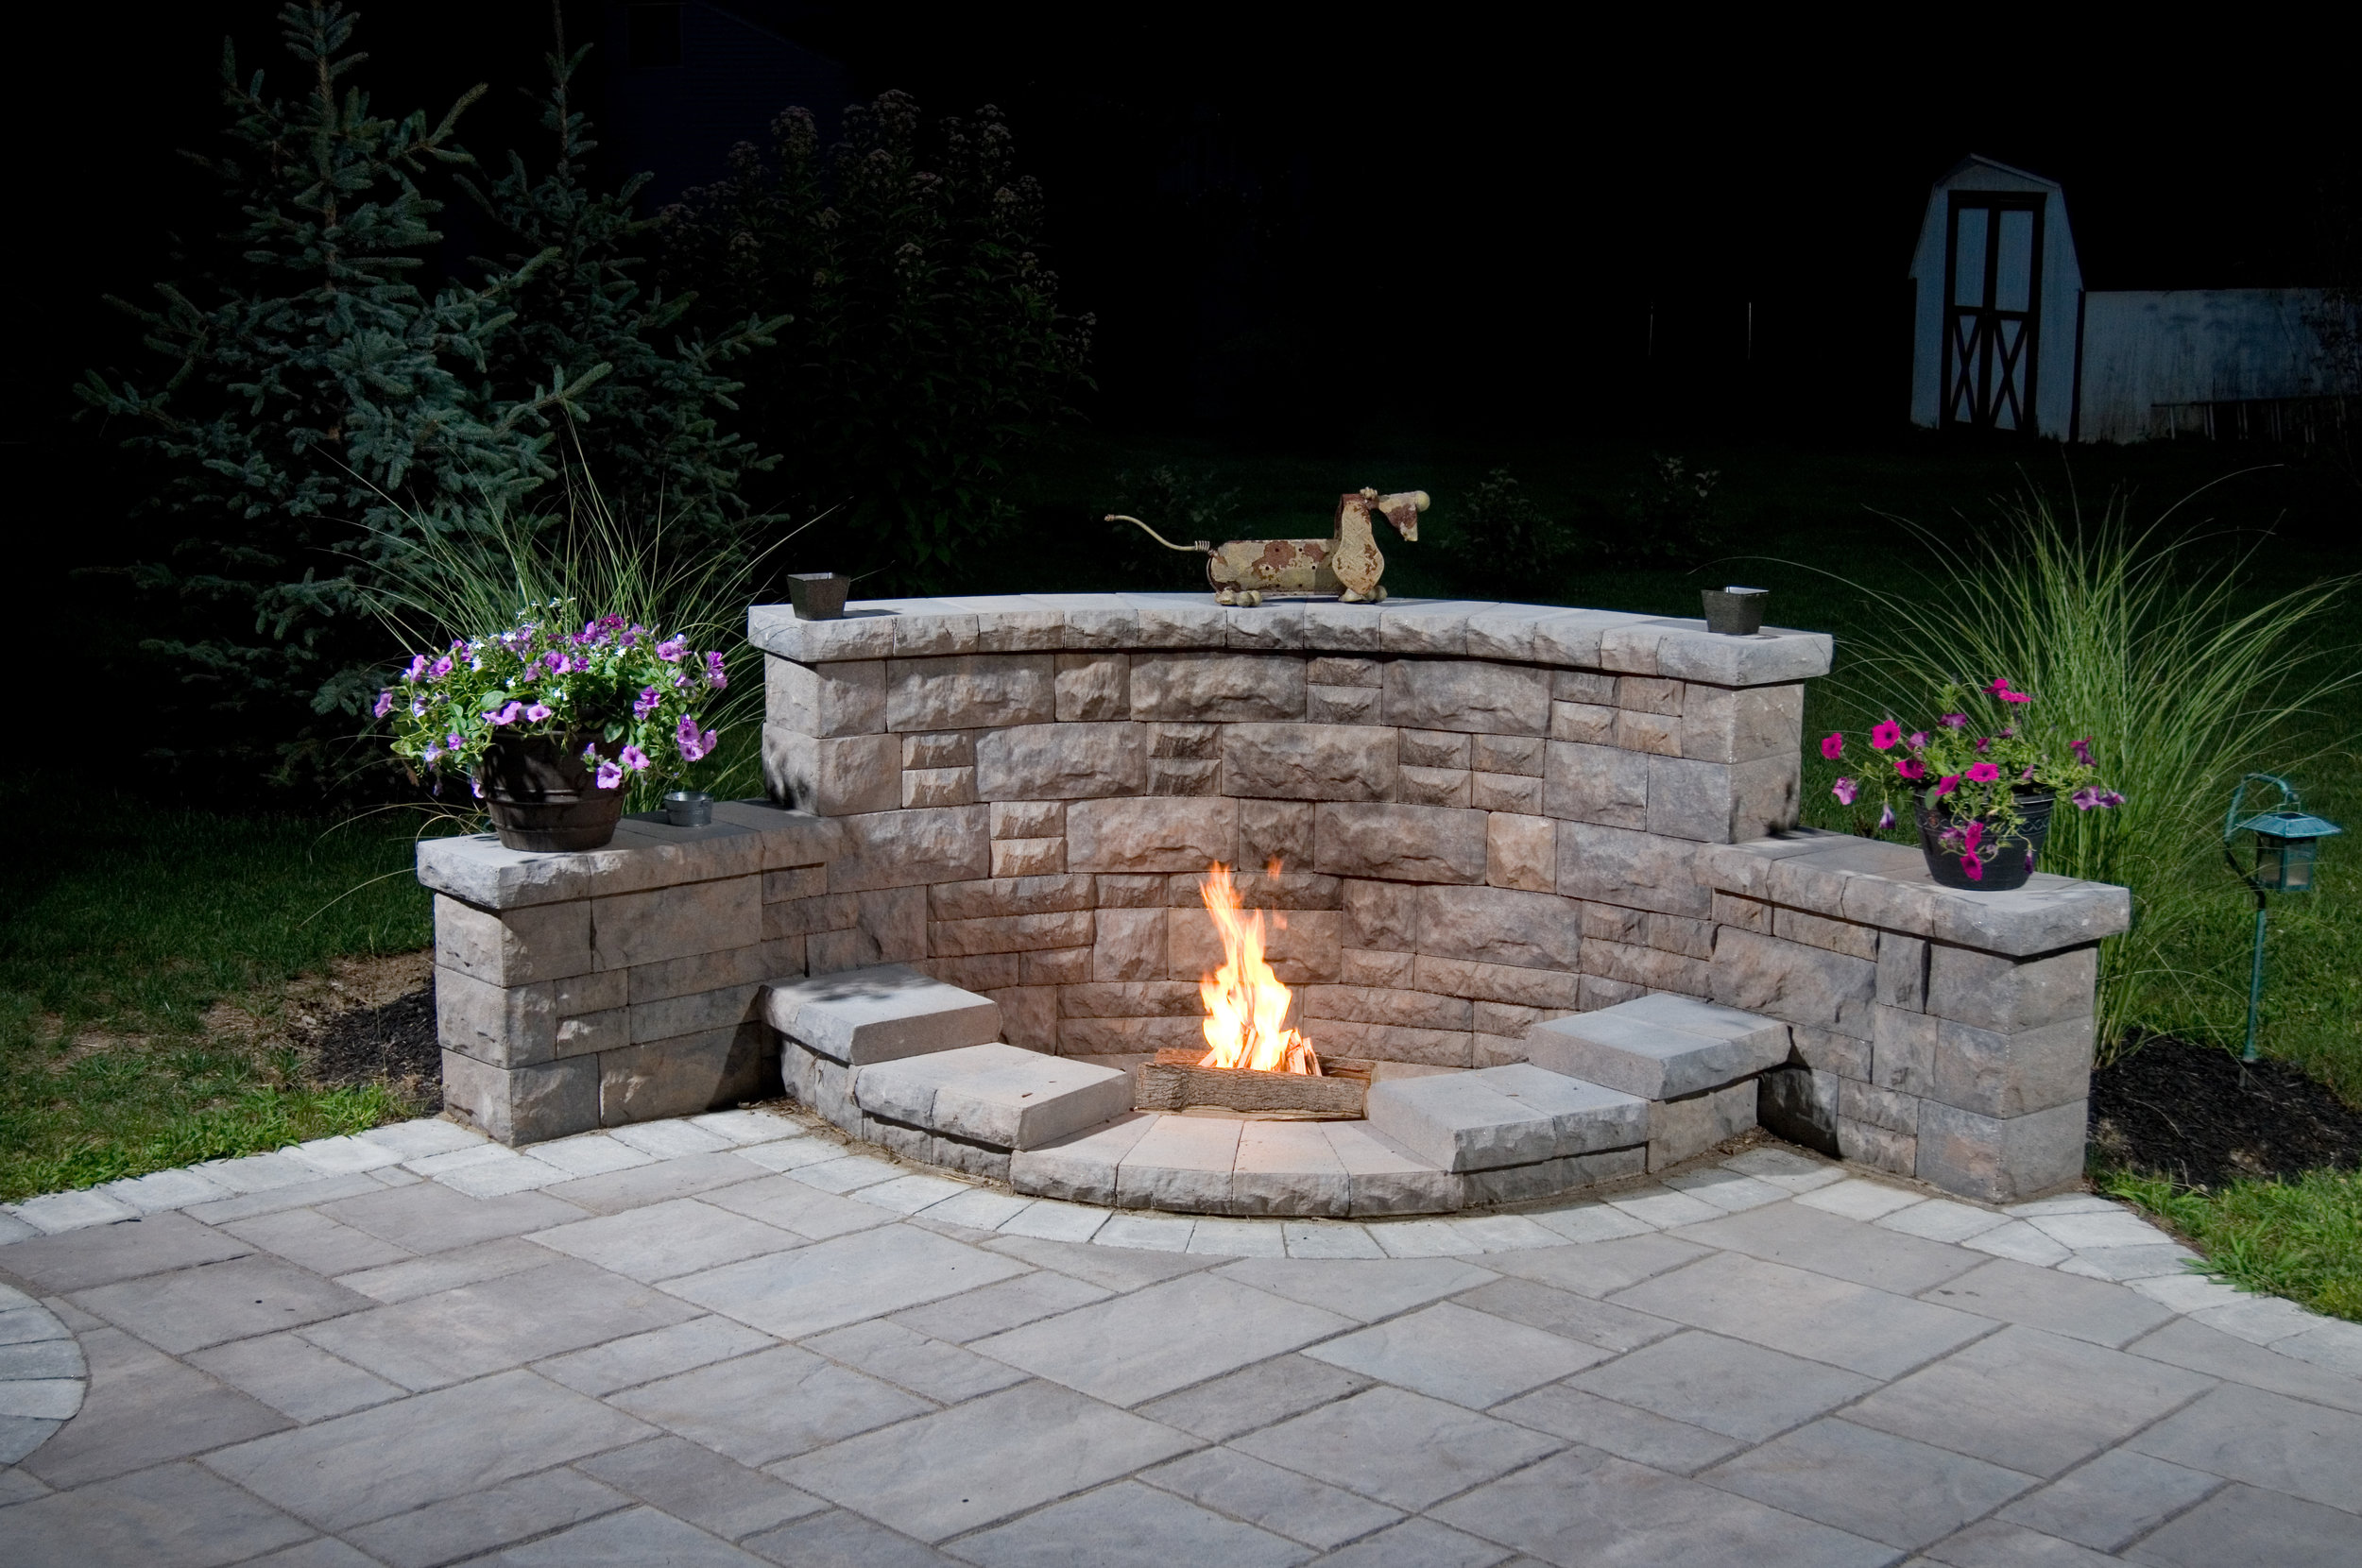 4 Beautiful Outdoor Fireplace And Fire, Pre Built Fire Pit